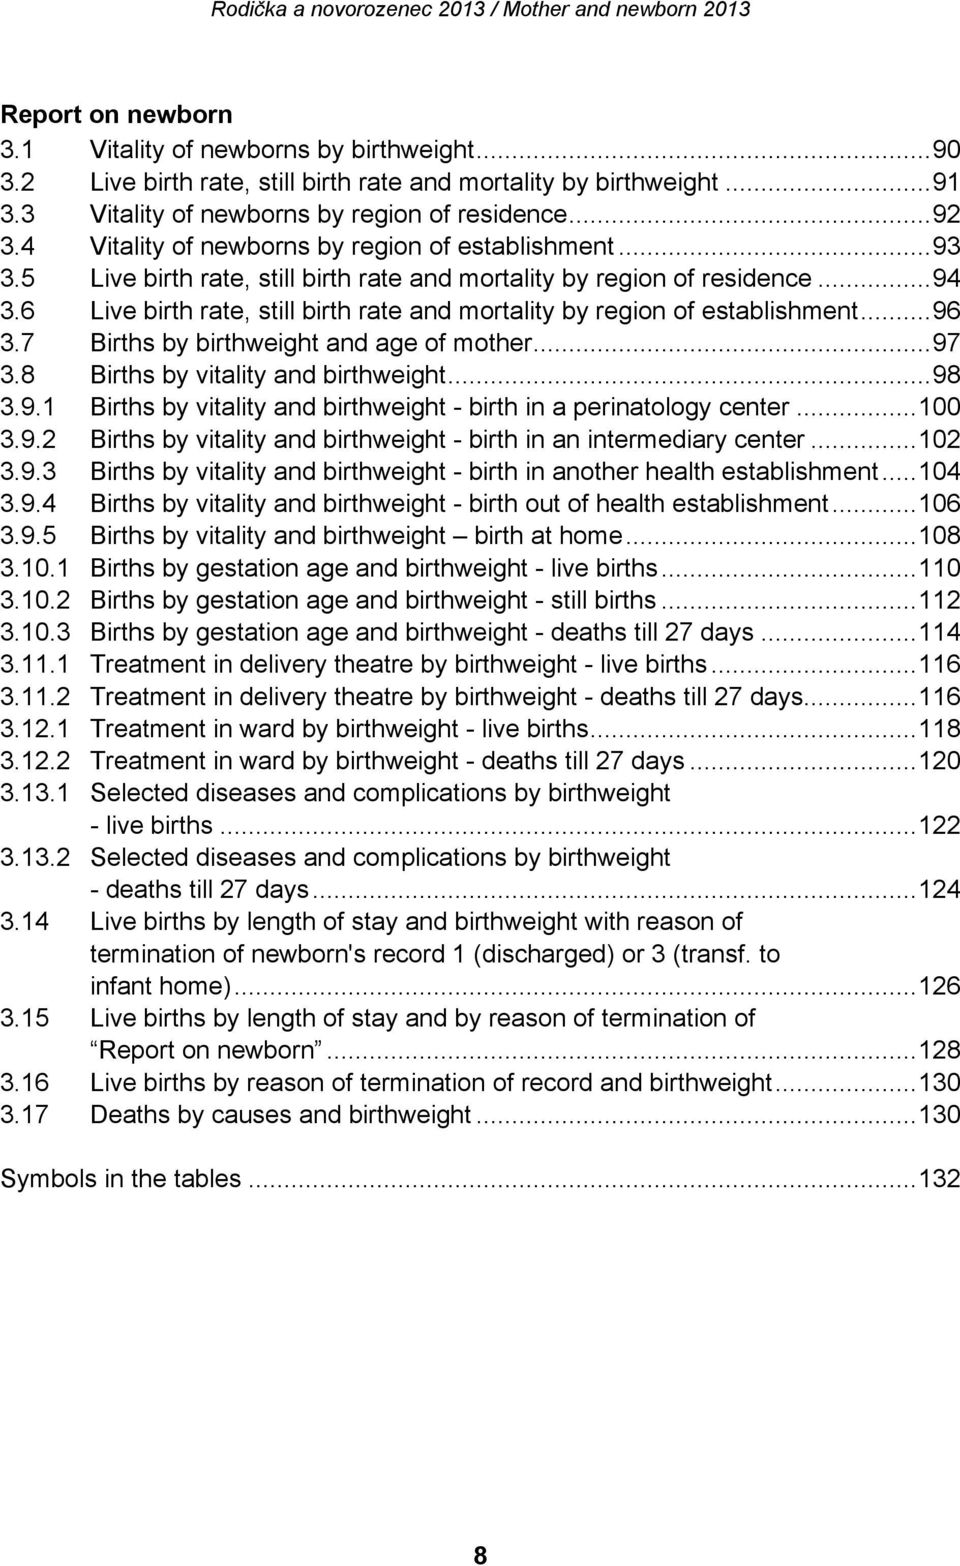 6 Live birth rate, still birth rate and mortality by region of establishment... 96 3.7 Births by birthweight and age of mother... 97 3.8 Births by vitality and birthweight... 98 3.9.1 Births by vitality and birthweight - birth in a perinatology center.